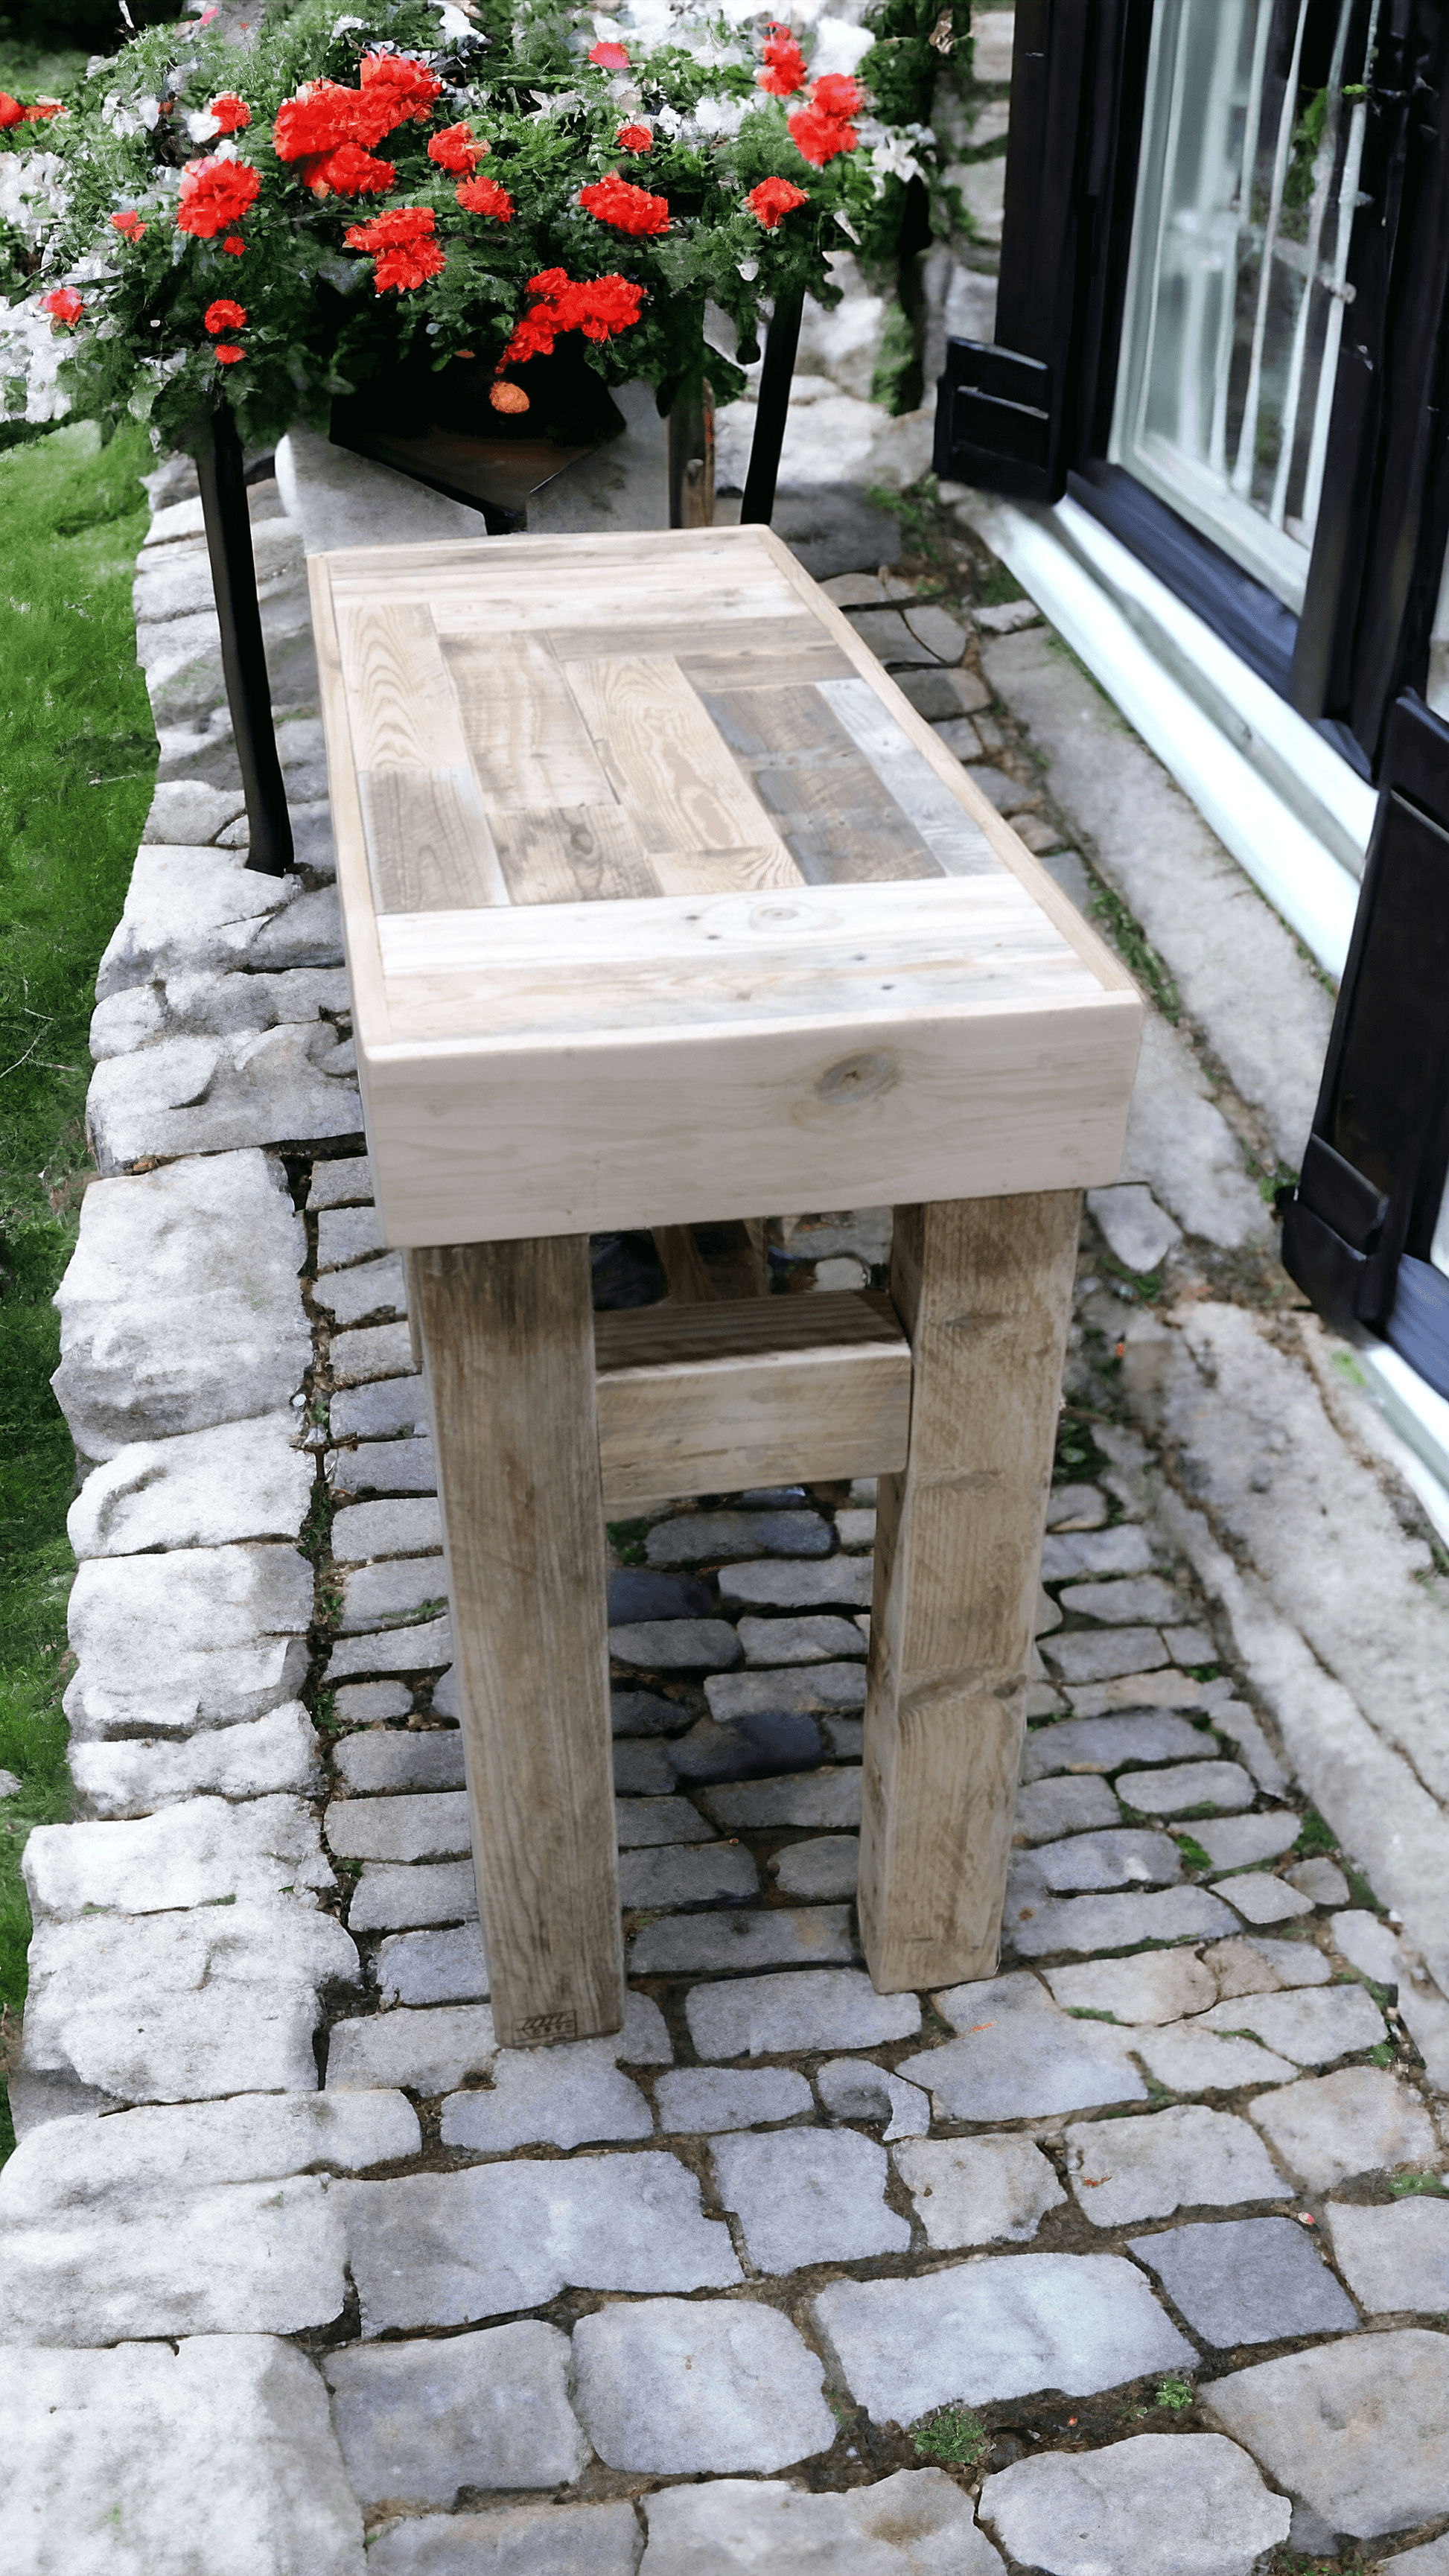 Console Table Upcycled Wood - Anpio woods ltd